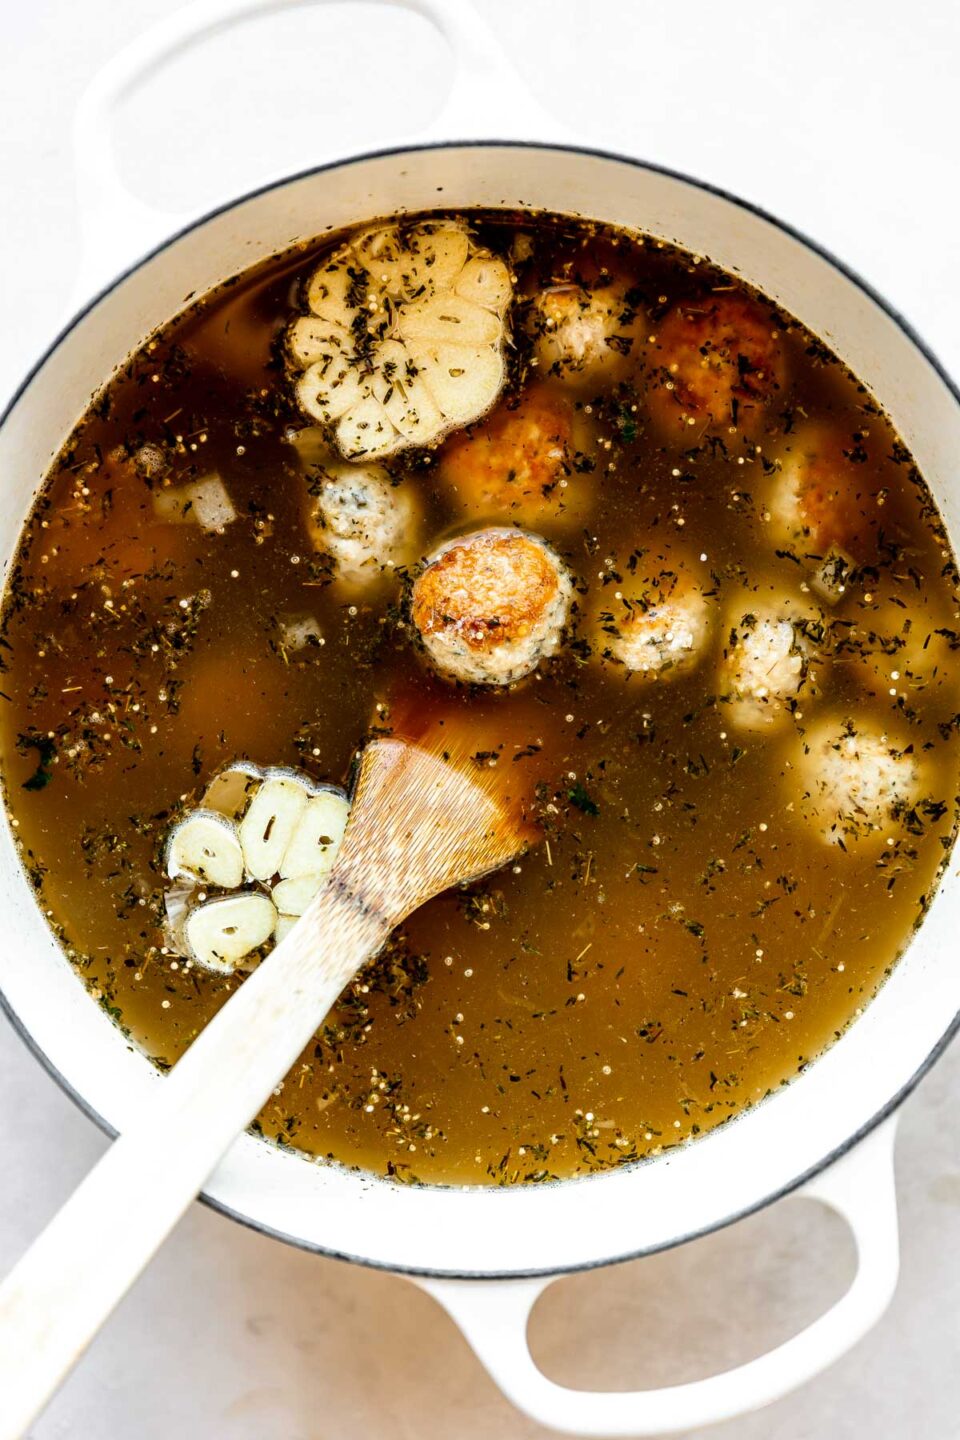 Italian wedding soup with turkey meatballs (or chicken meatballs) is built inside of a large white pot. The pot sits atop a creamy white textured surface.  A wooden turner rests inside of the pot for stirring.